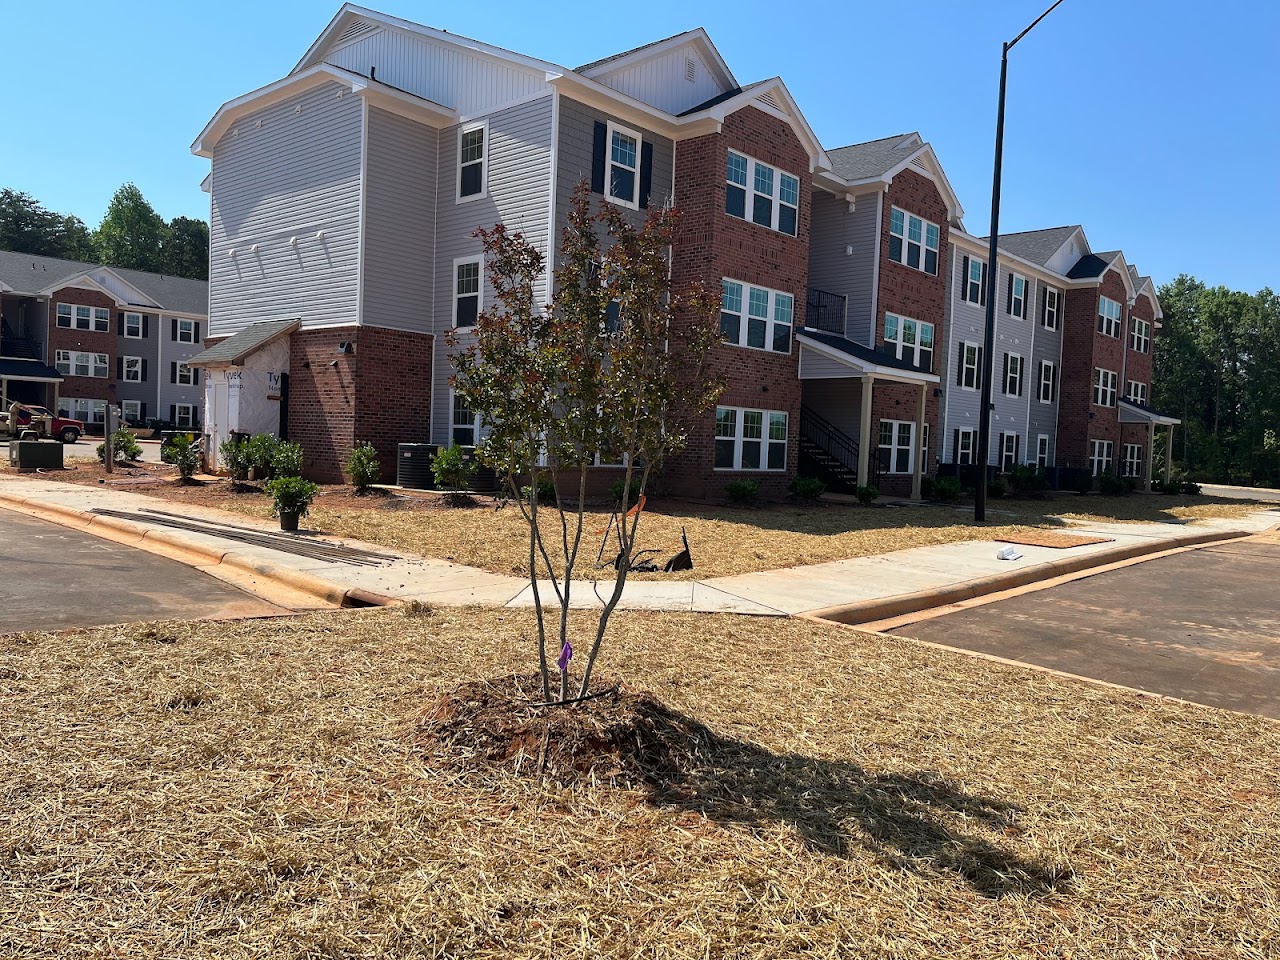 Photo of CATAWBA LANDING. Affordable housing located at 2110 17TH AVE NE HICKORY, NC 28601